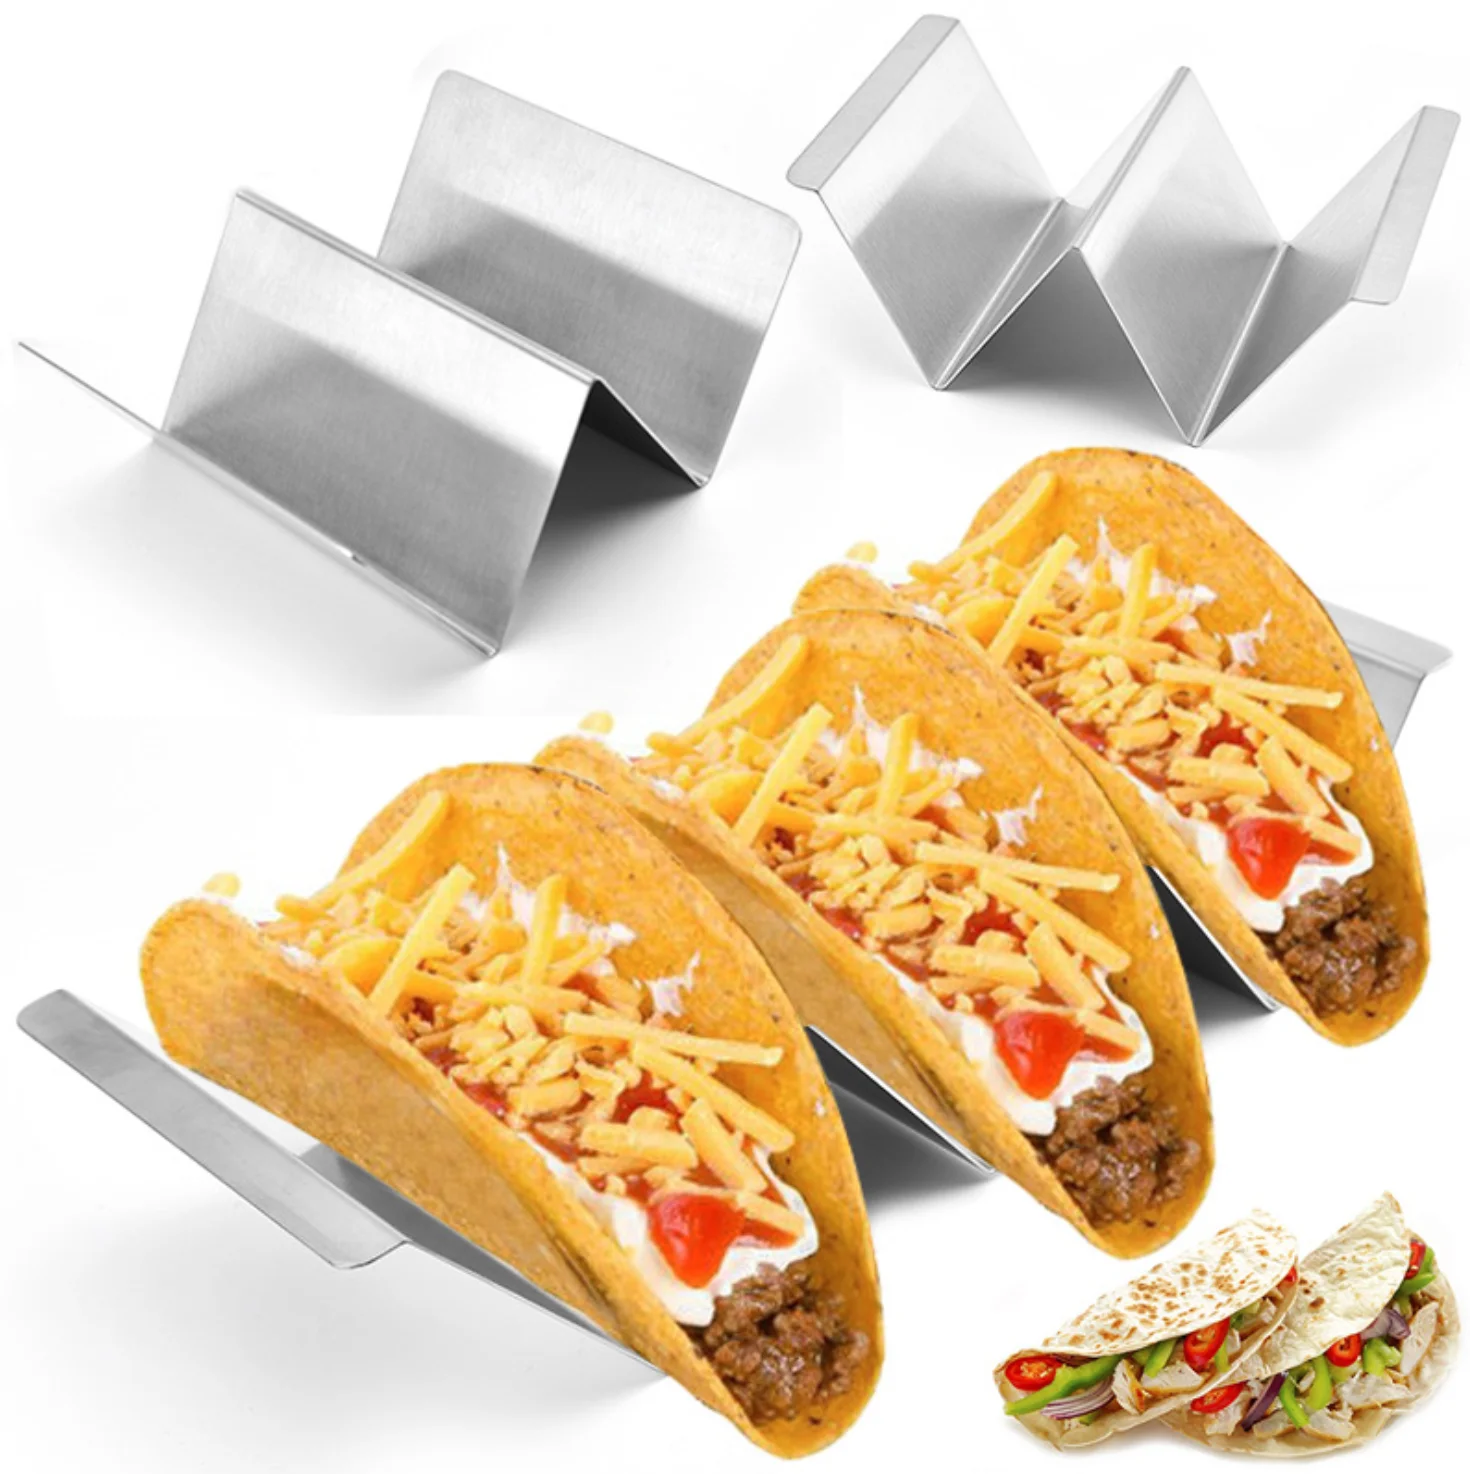 H936 Kitchen Restaurant Creative Dish Durable Easy To Fill Reusable Taco Stand Multi Sizes 430 Stainless Steel Taco Holder